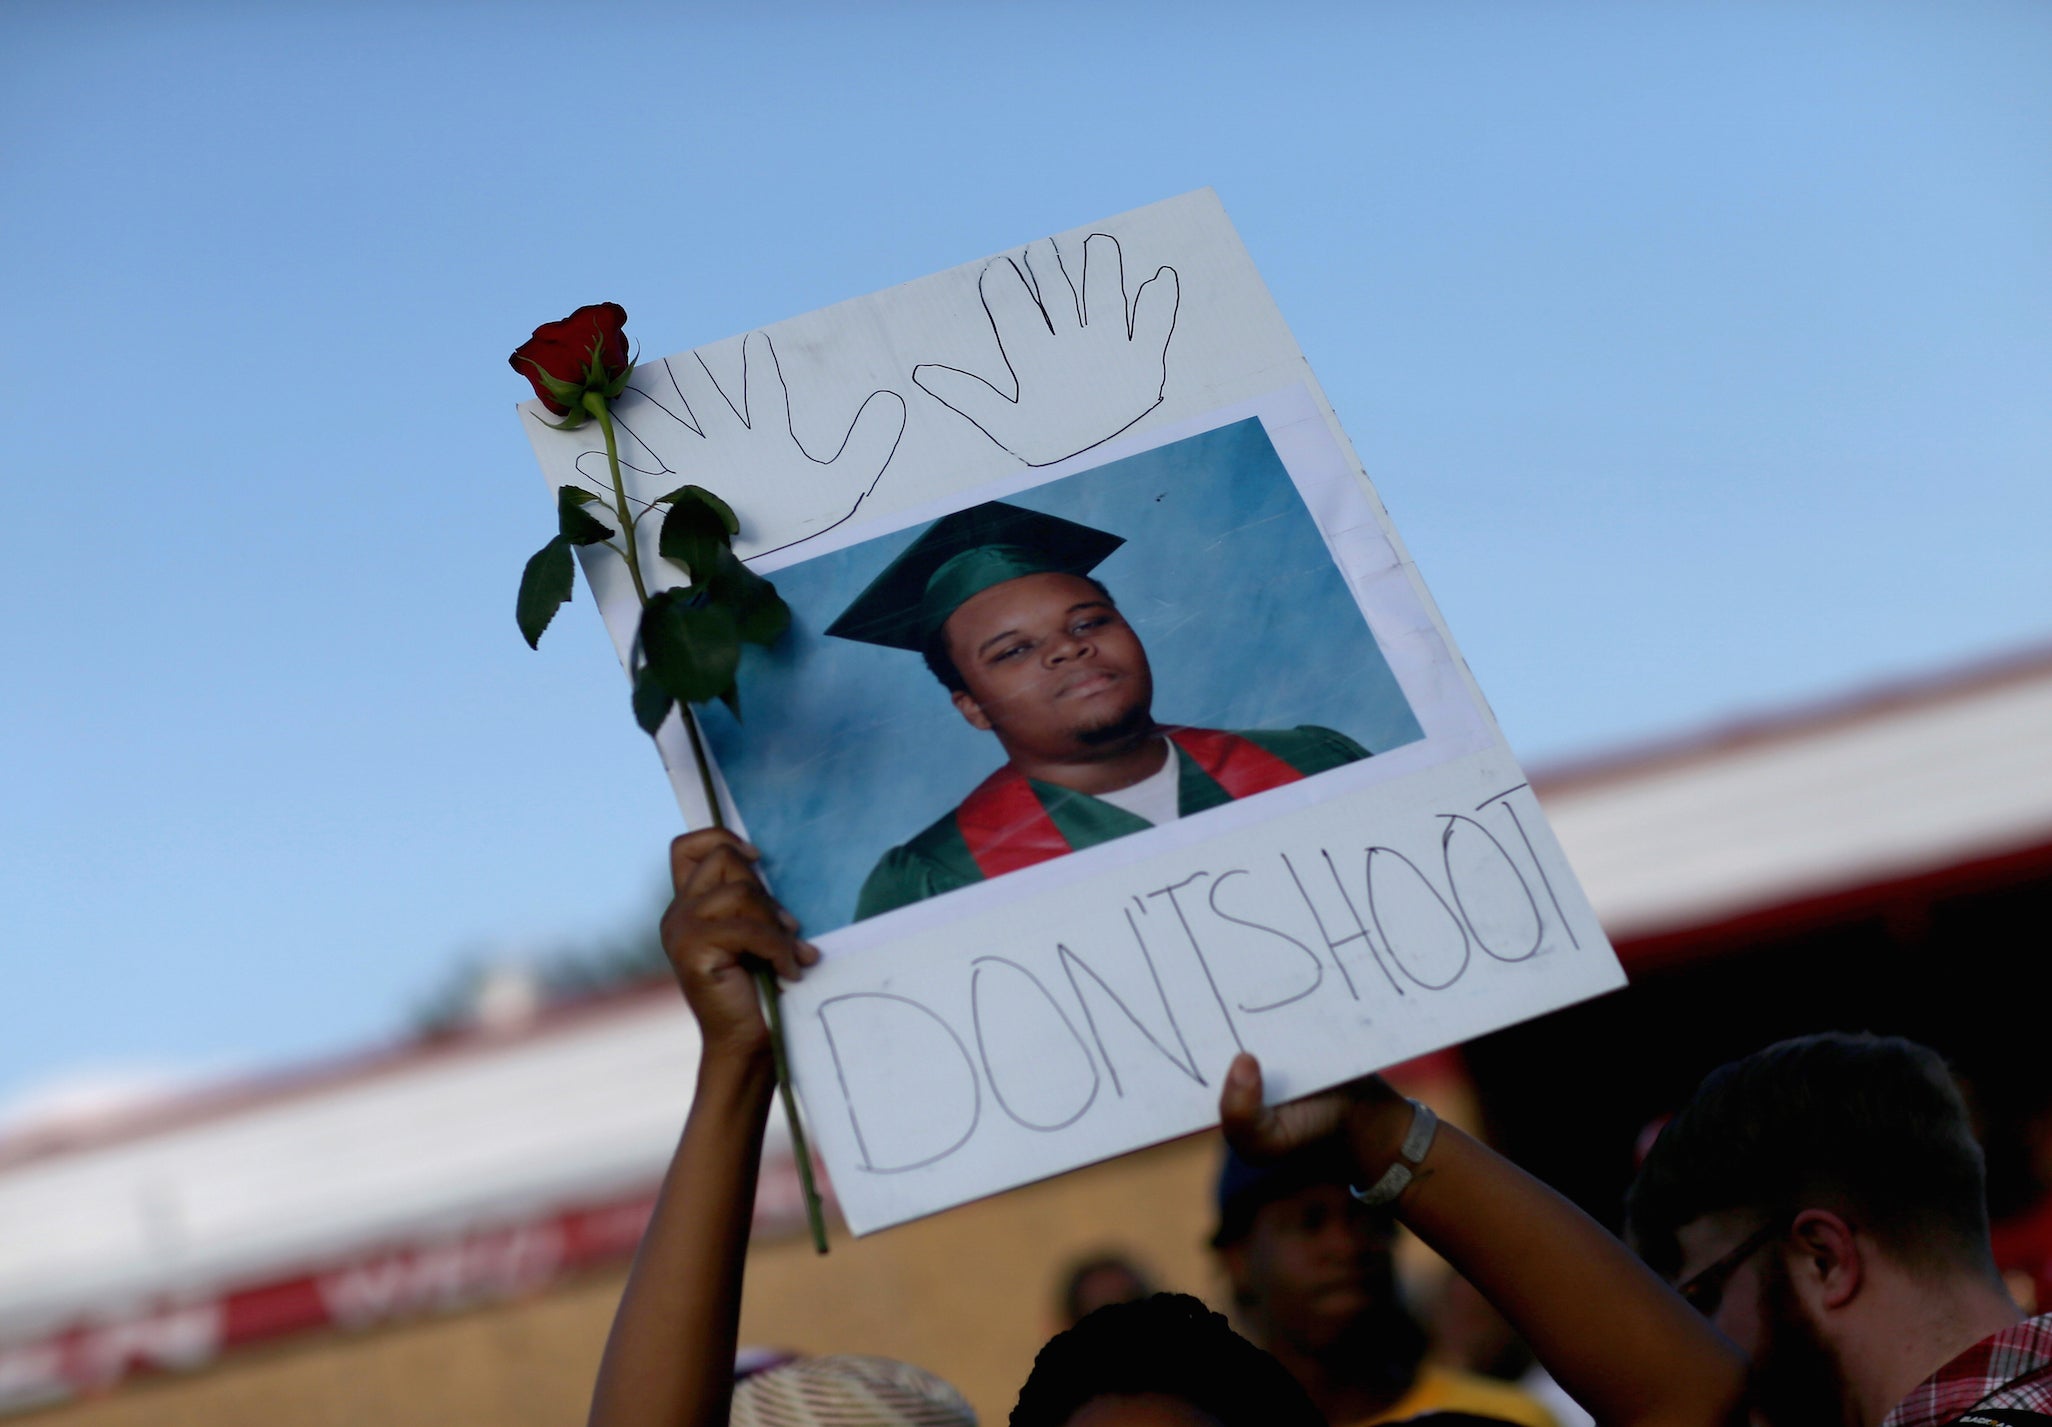 A demonstrator holds a sign reading "Dont Shoot" with images of Michael Brown on 17 August 2014 in Ferguson, Missouri.